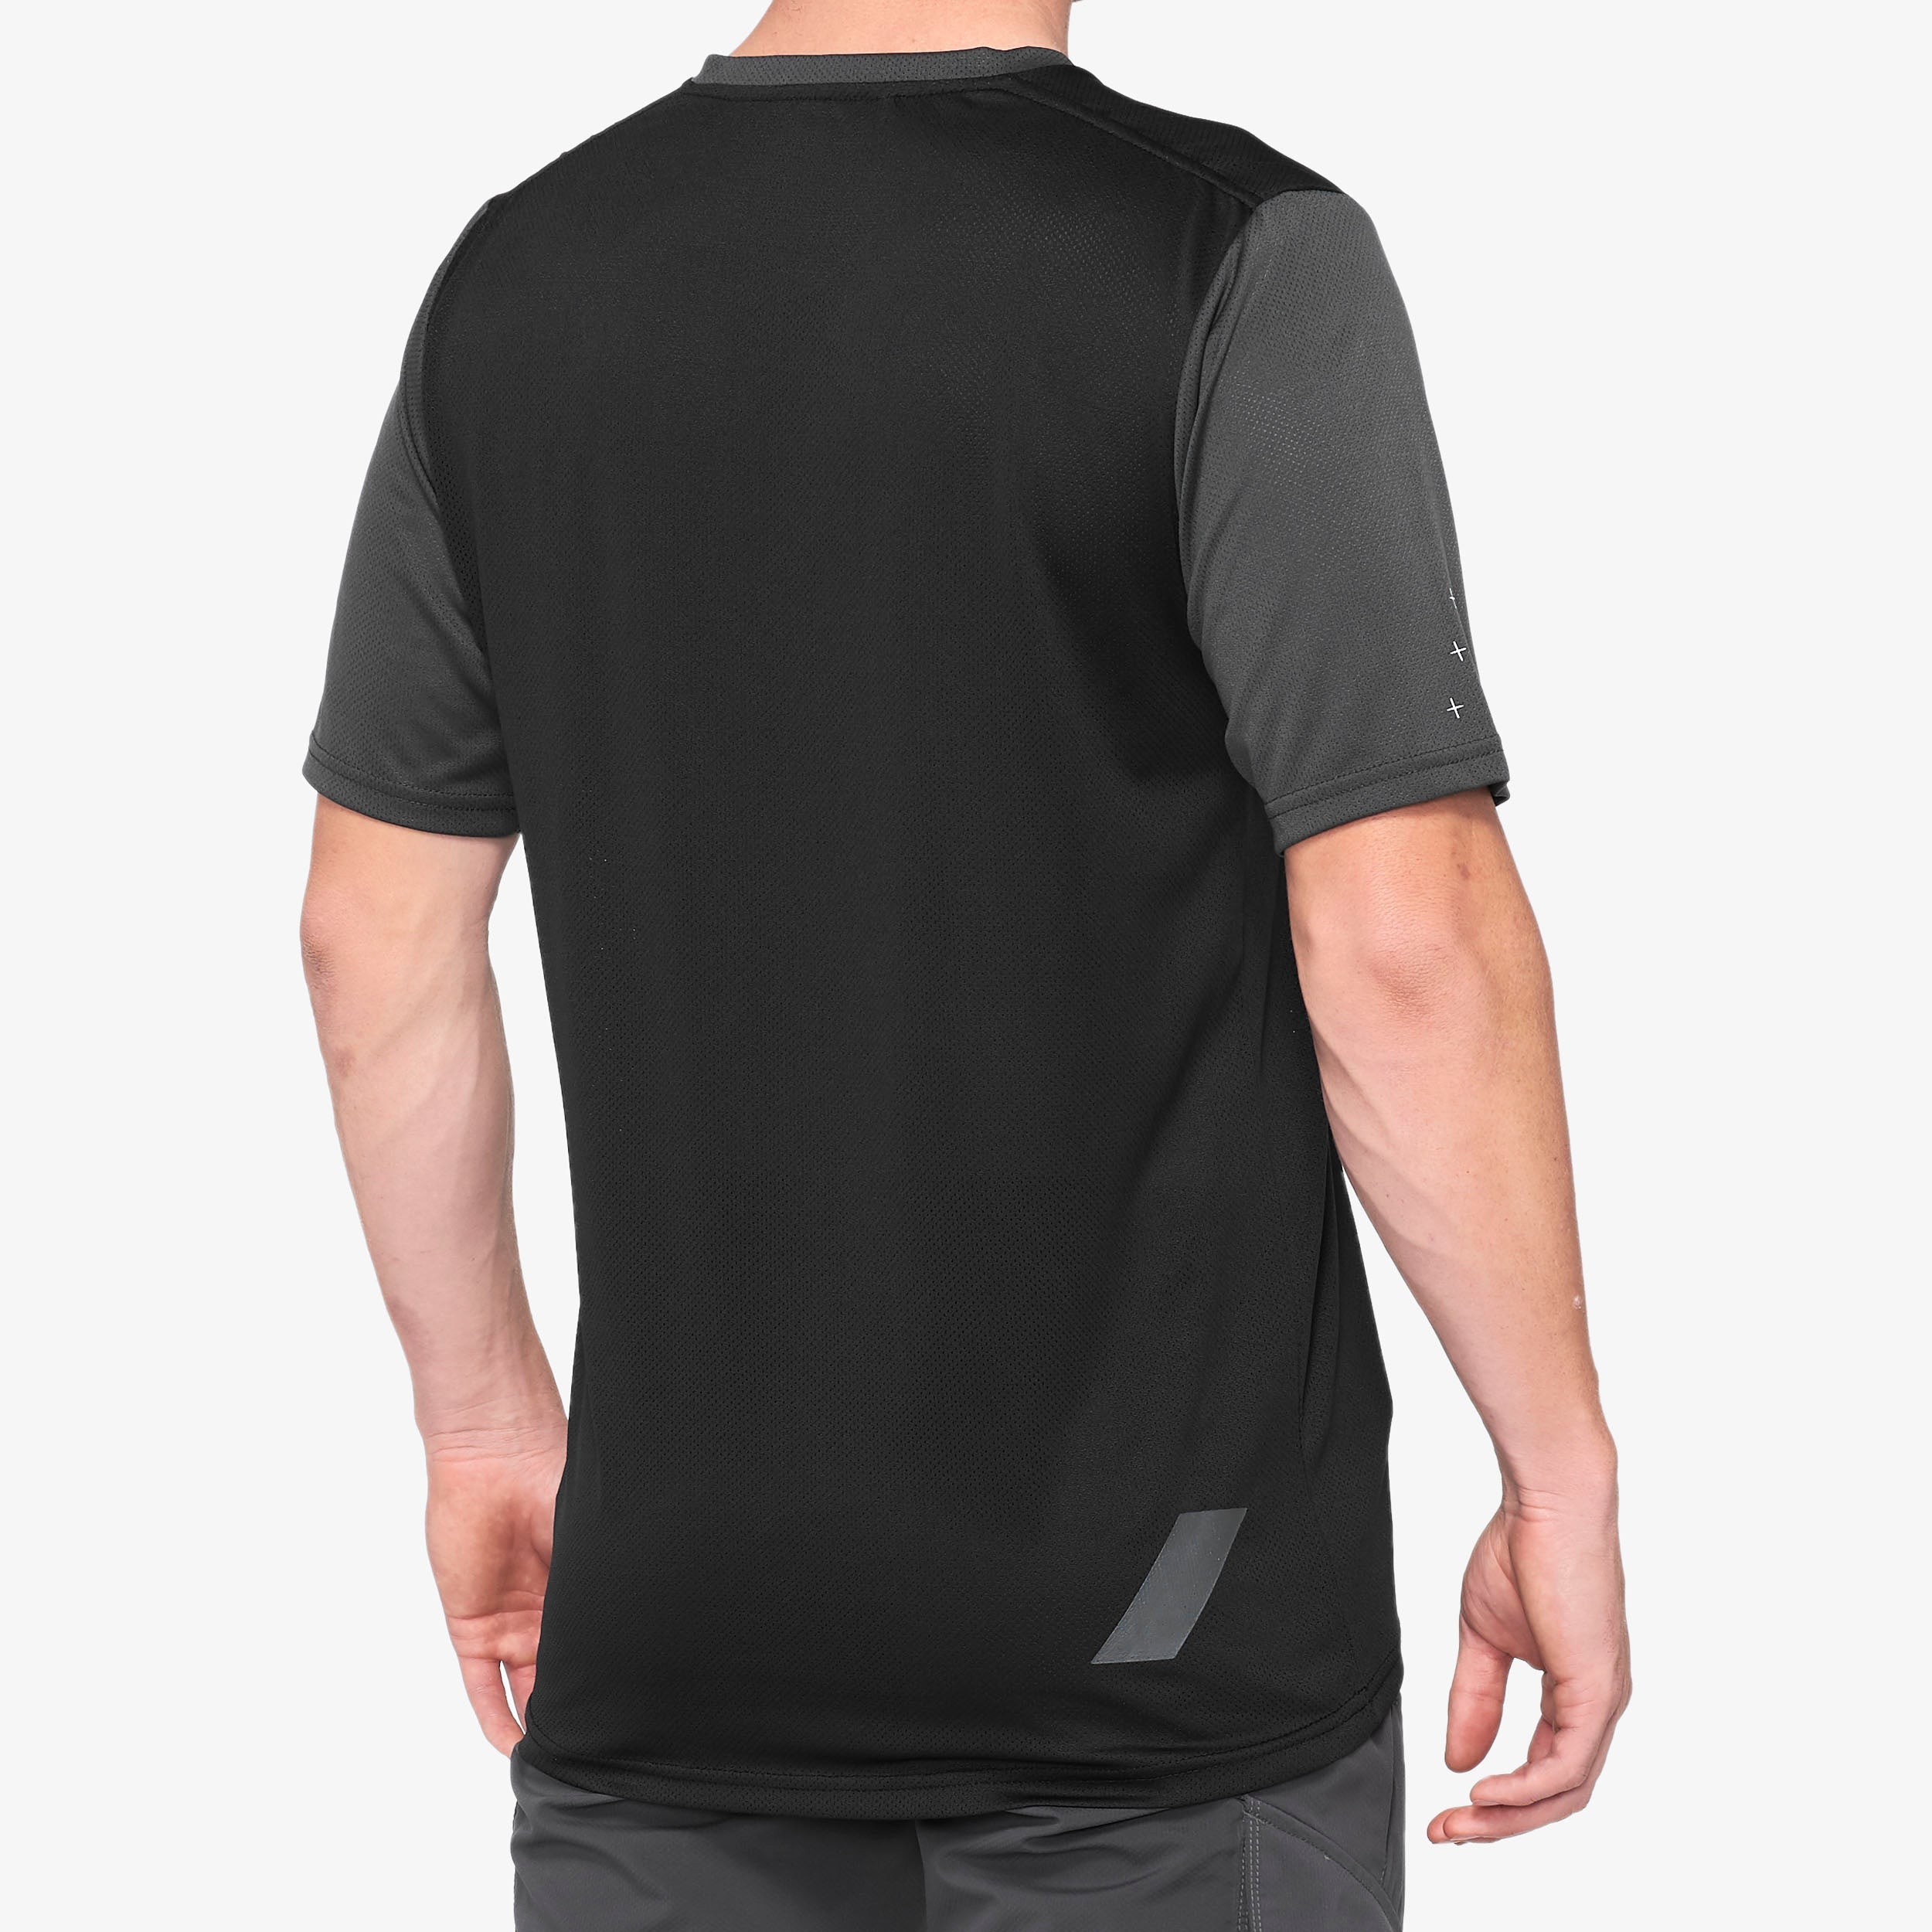 RIDECAMP Short Sleeve Jersey Black/Charcoal - Secondary